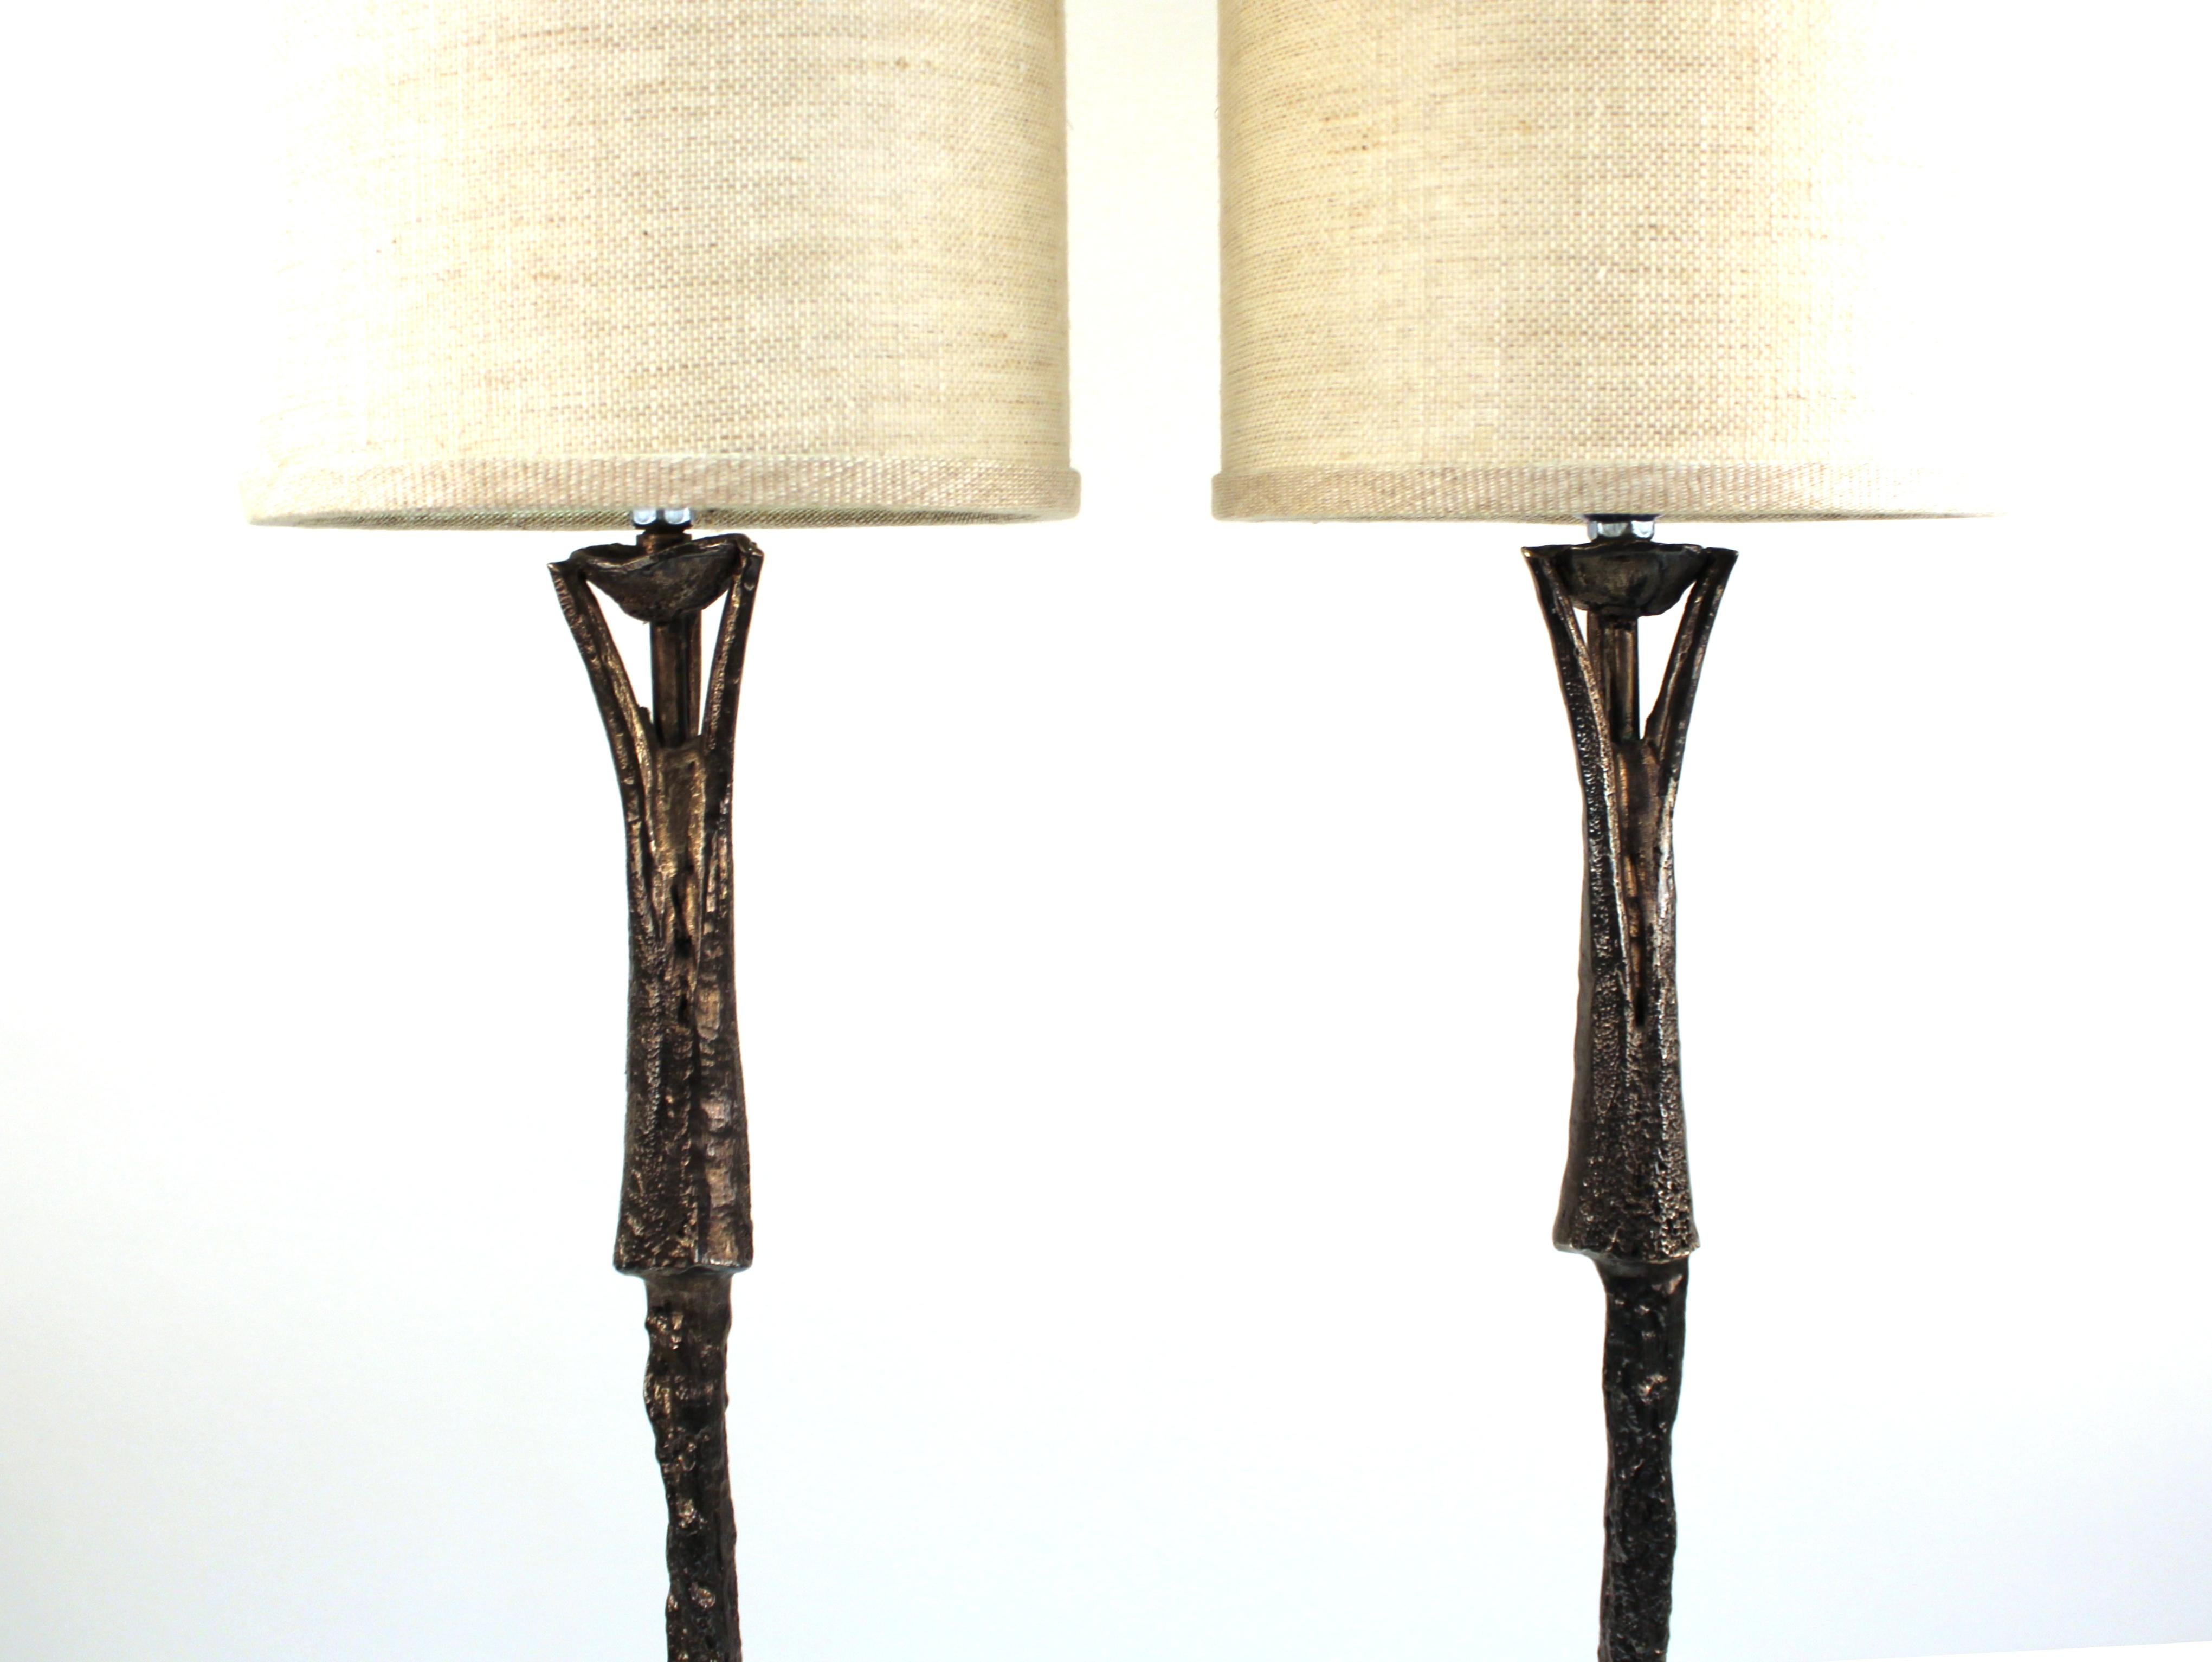 French modern pair of table lamps designed in bronze by Designer Pierre Casenove in the 1990s. The pair has signatures on the back of both bases and comes with the shades pictured. In great vintage condition with age-appropriate wear and use.